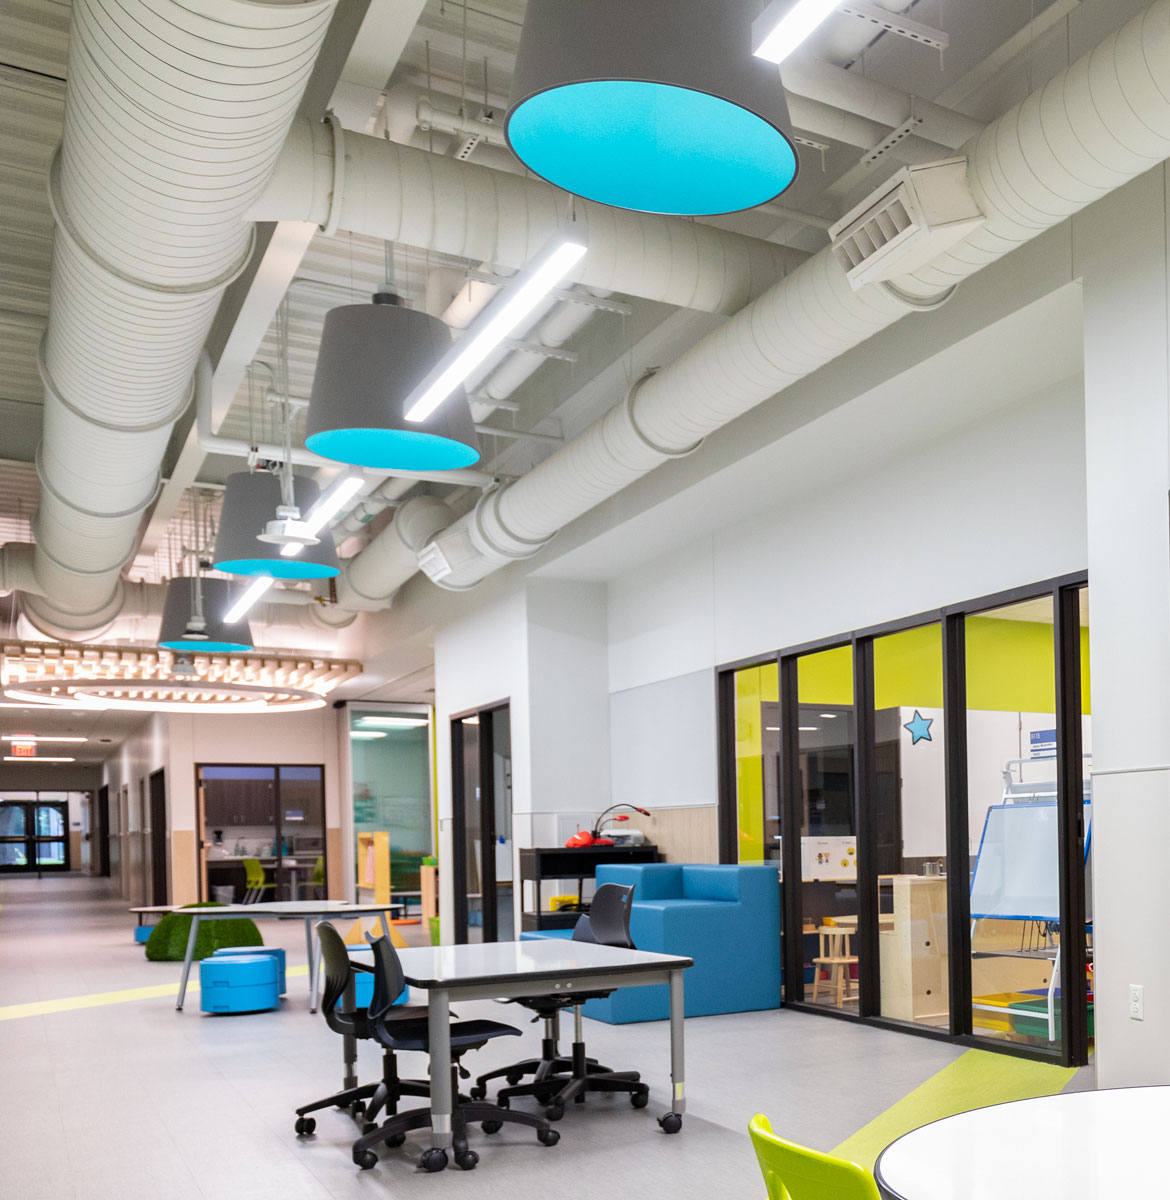 Lumetta’s L2 Tapered Acoustic Pendants were the perfect acoustic lighting solution for Menchaca Elementary School.